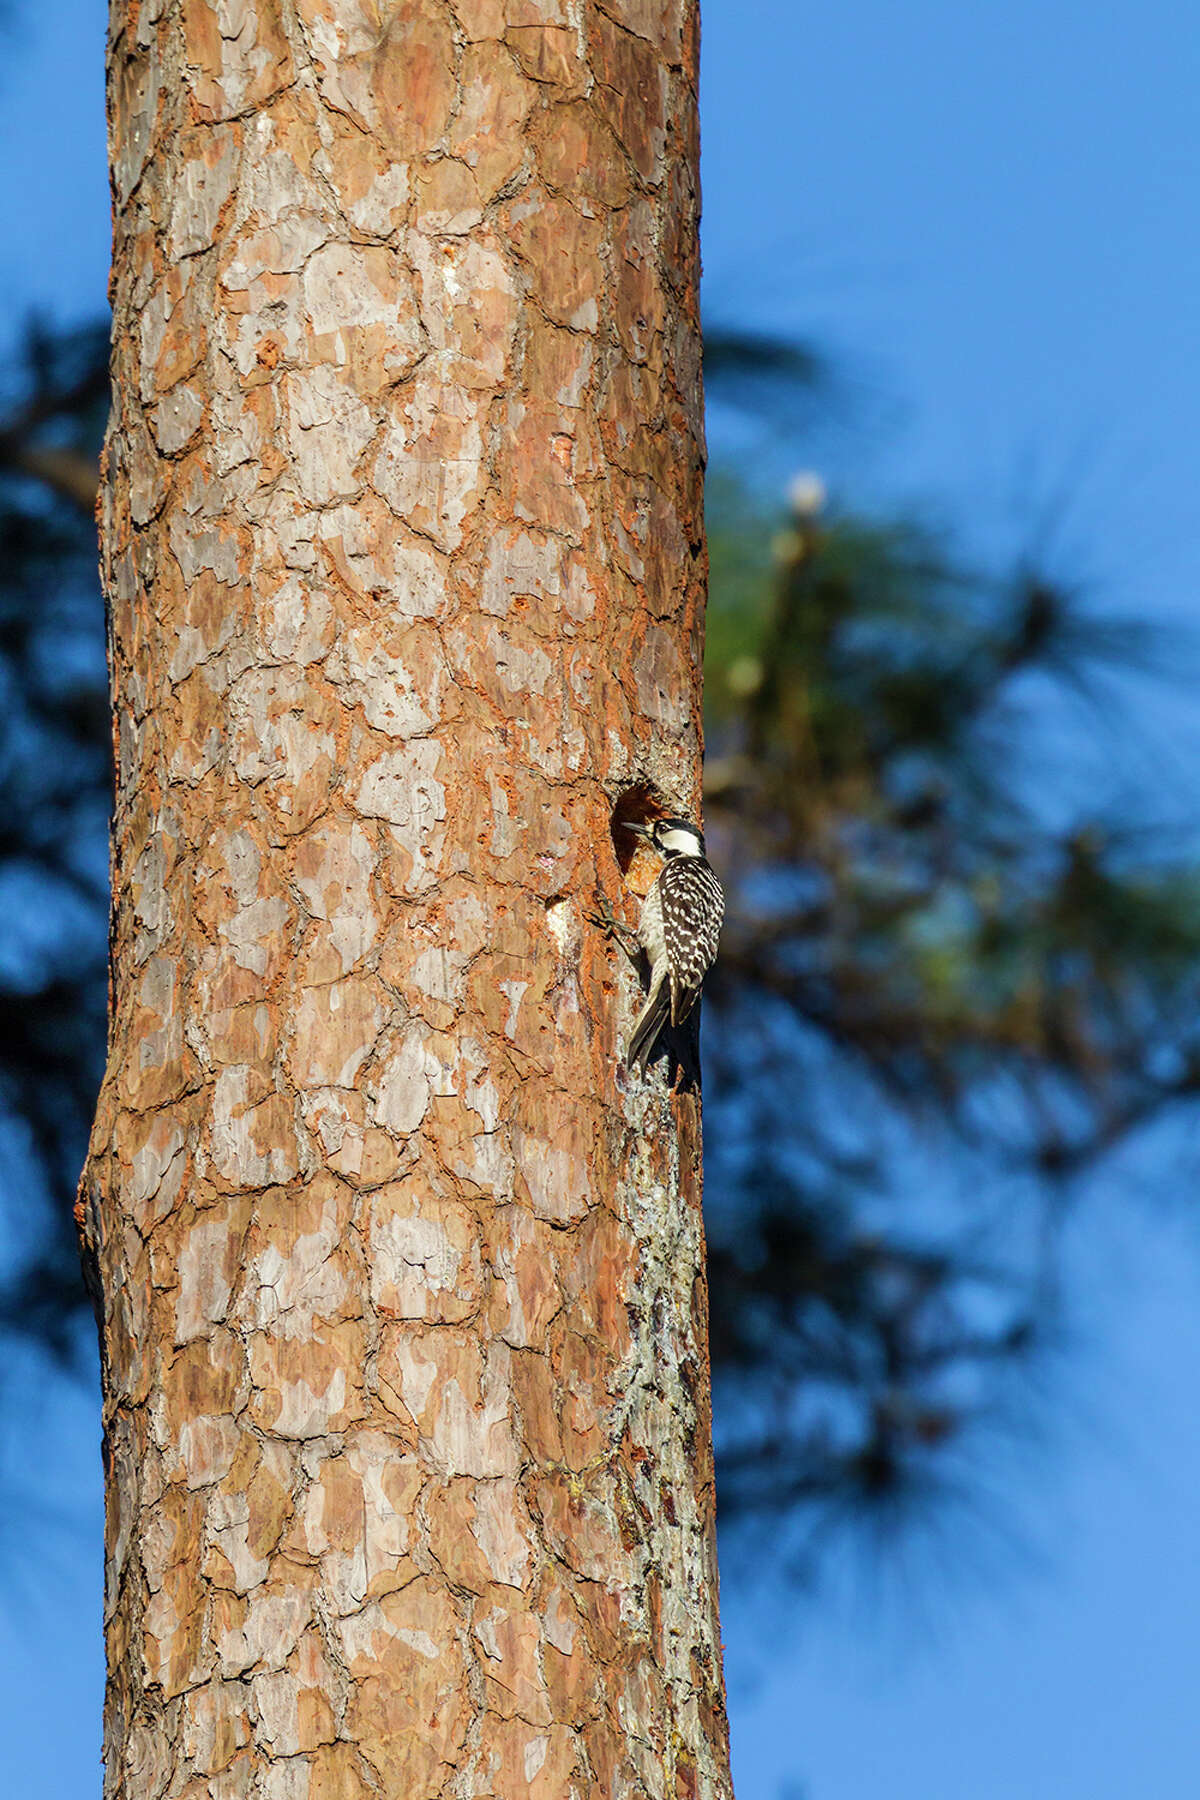 The endangered red-cockaded woodpecker, about the size of a cardinal, lives in remnants of the Southern Pine Forest like the W. G. Jones State Forest.